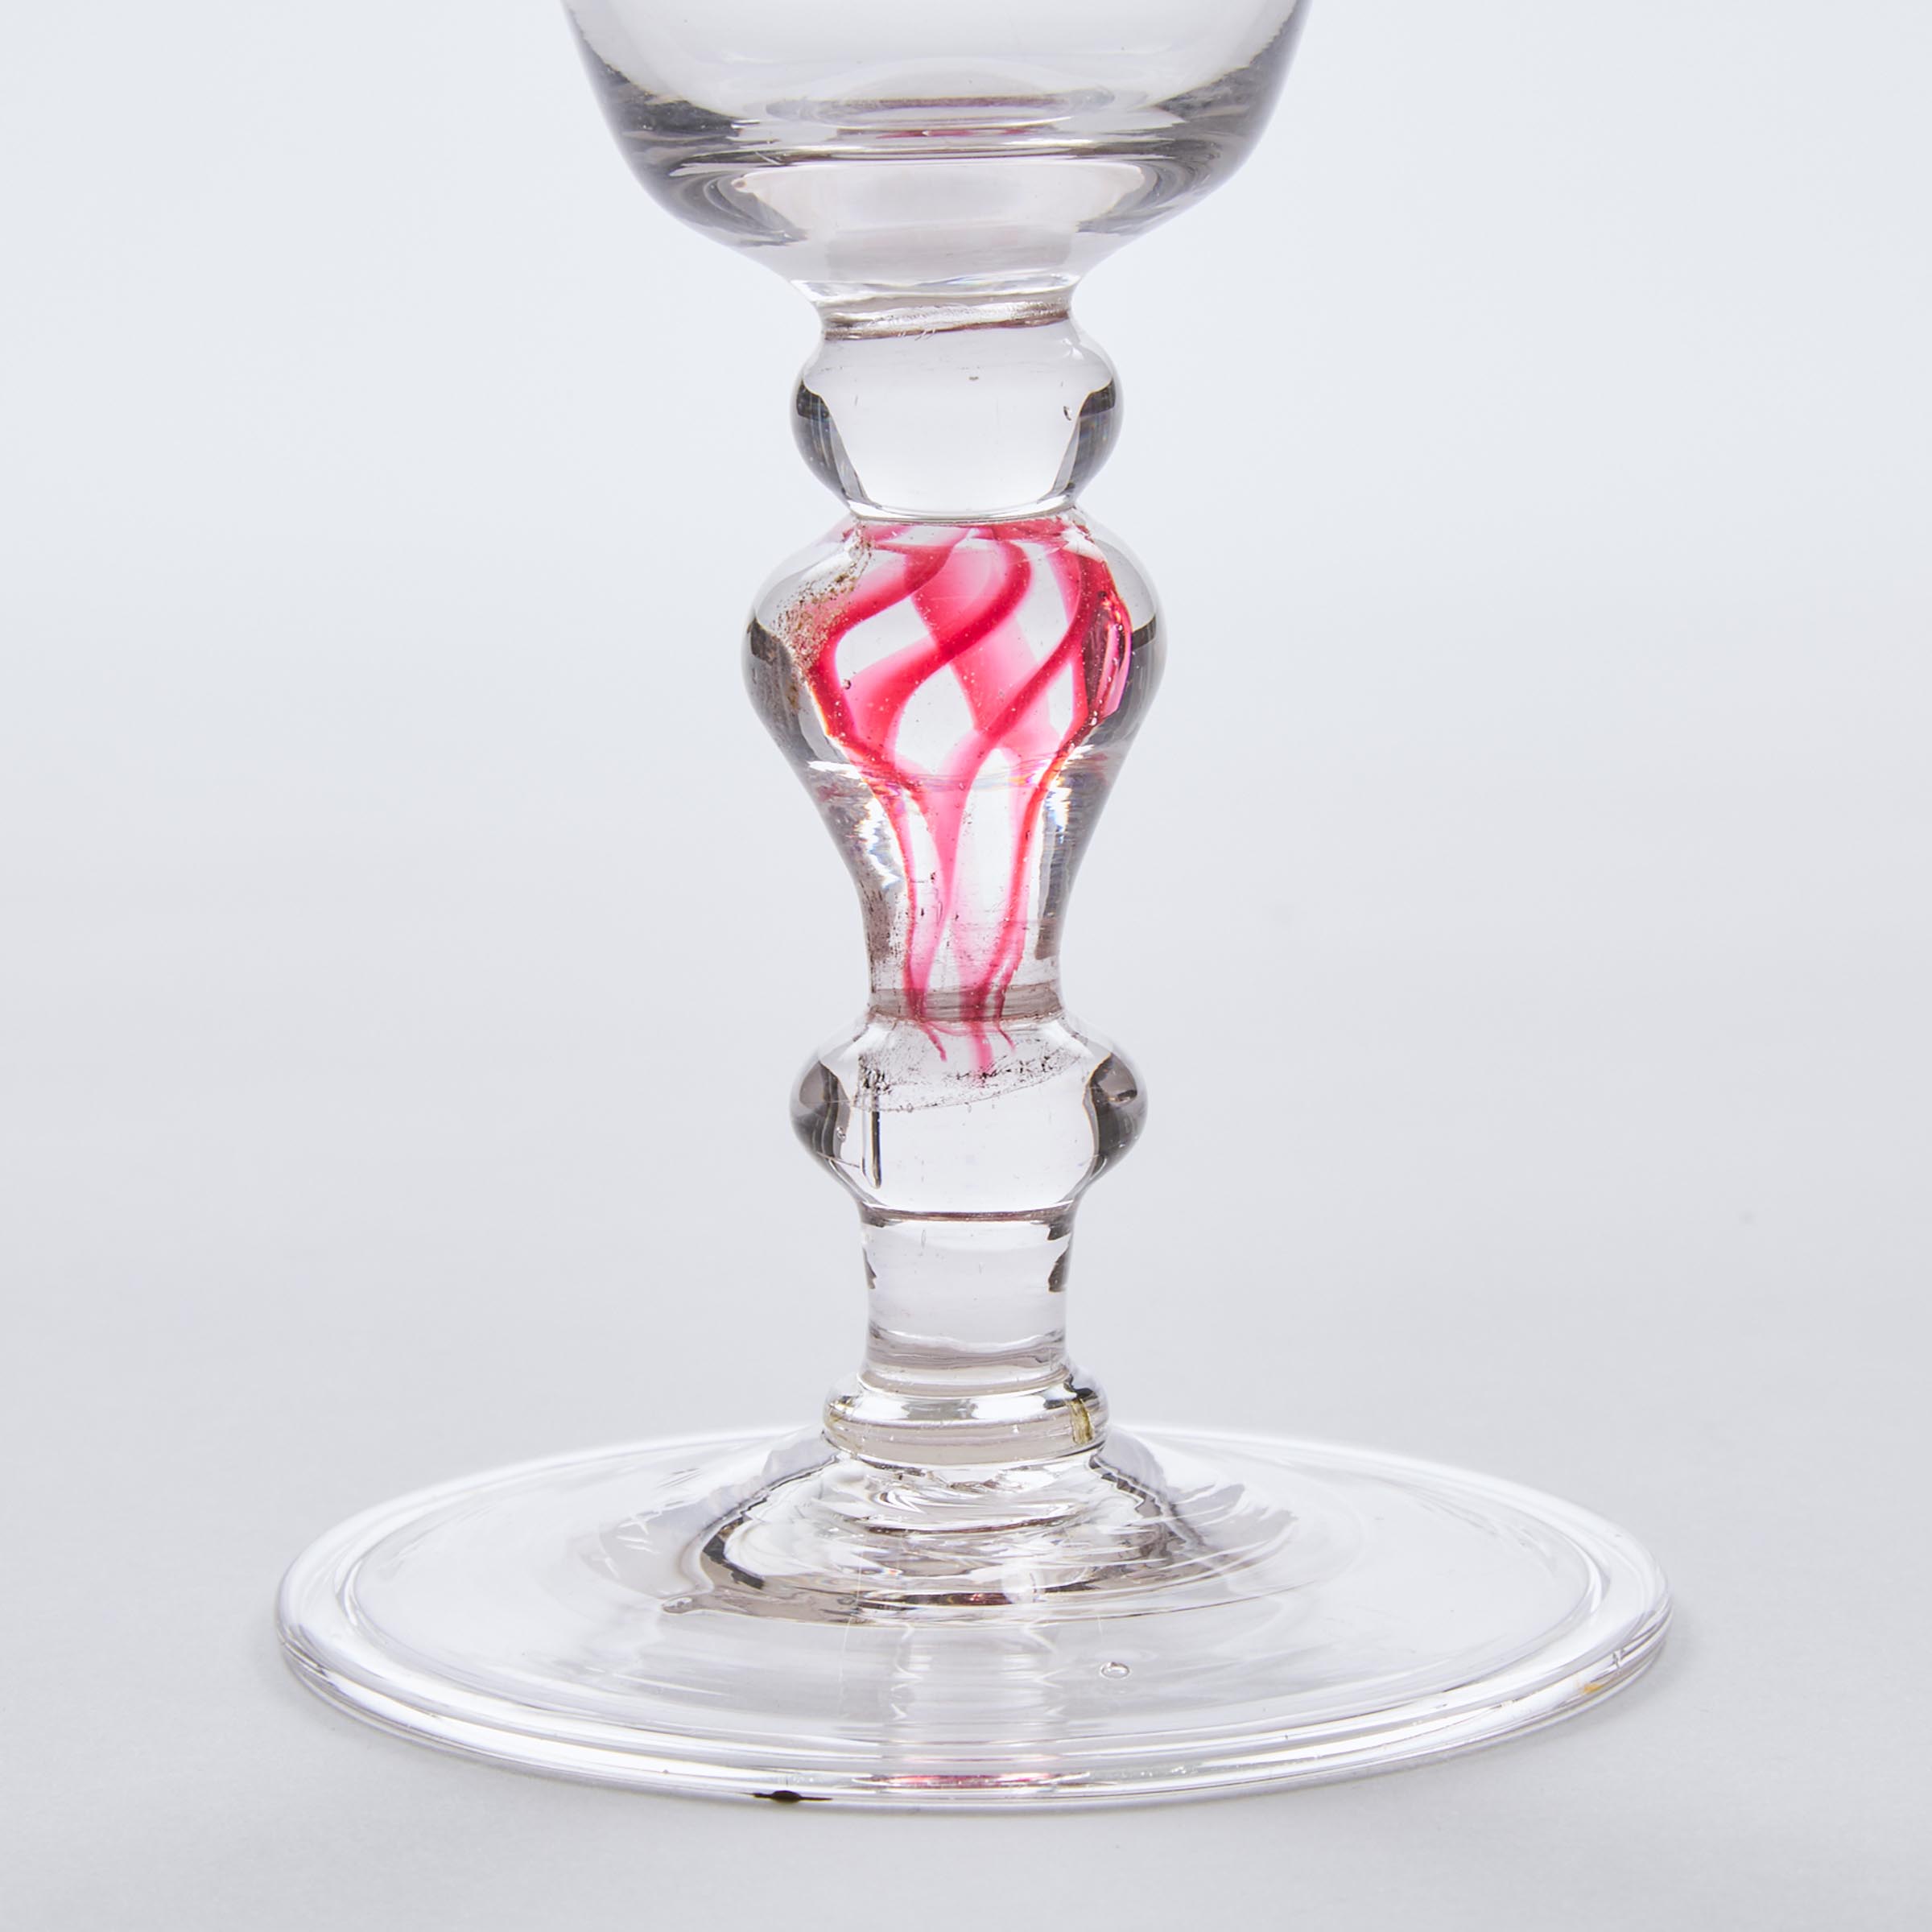 Bohemian Red Twist Stemmed Engraved Wine Glass, early 18th century